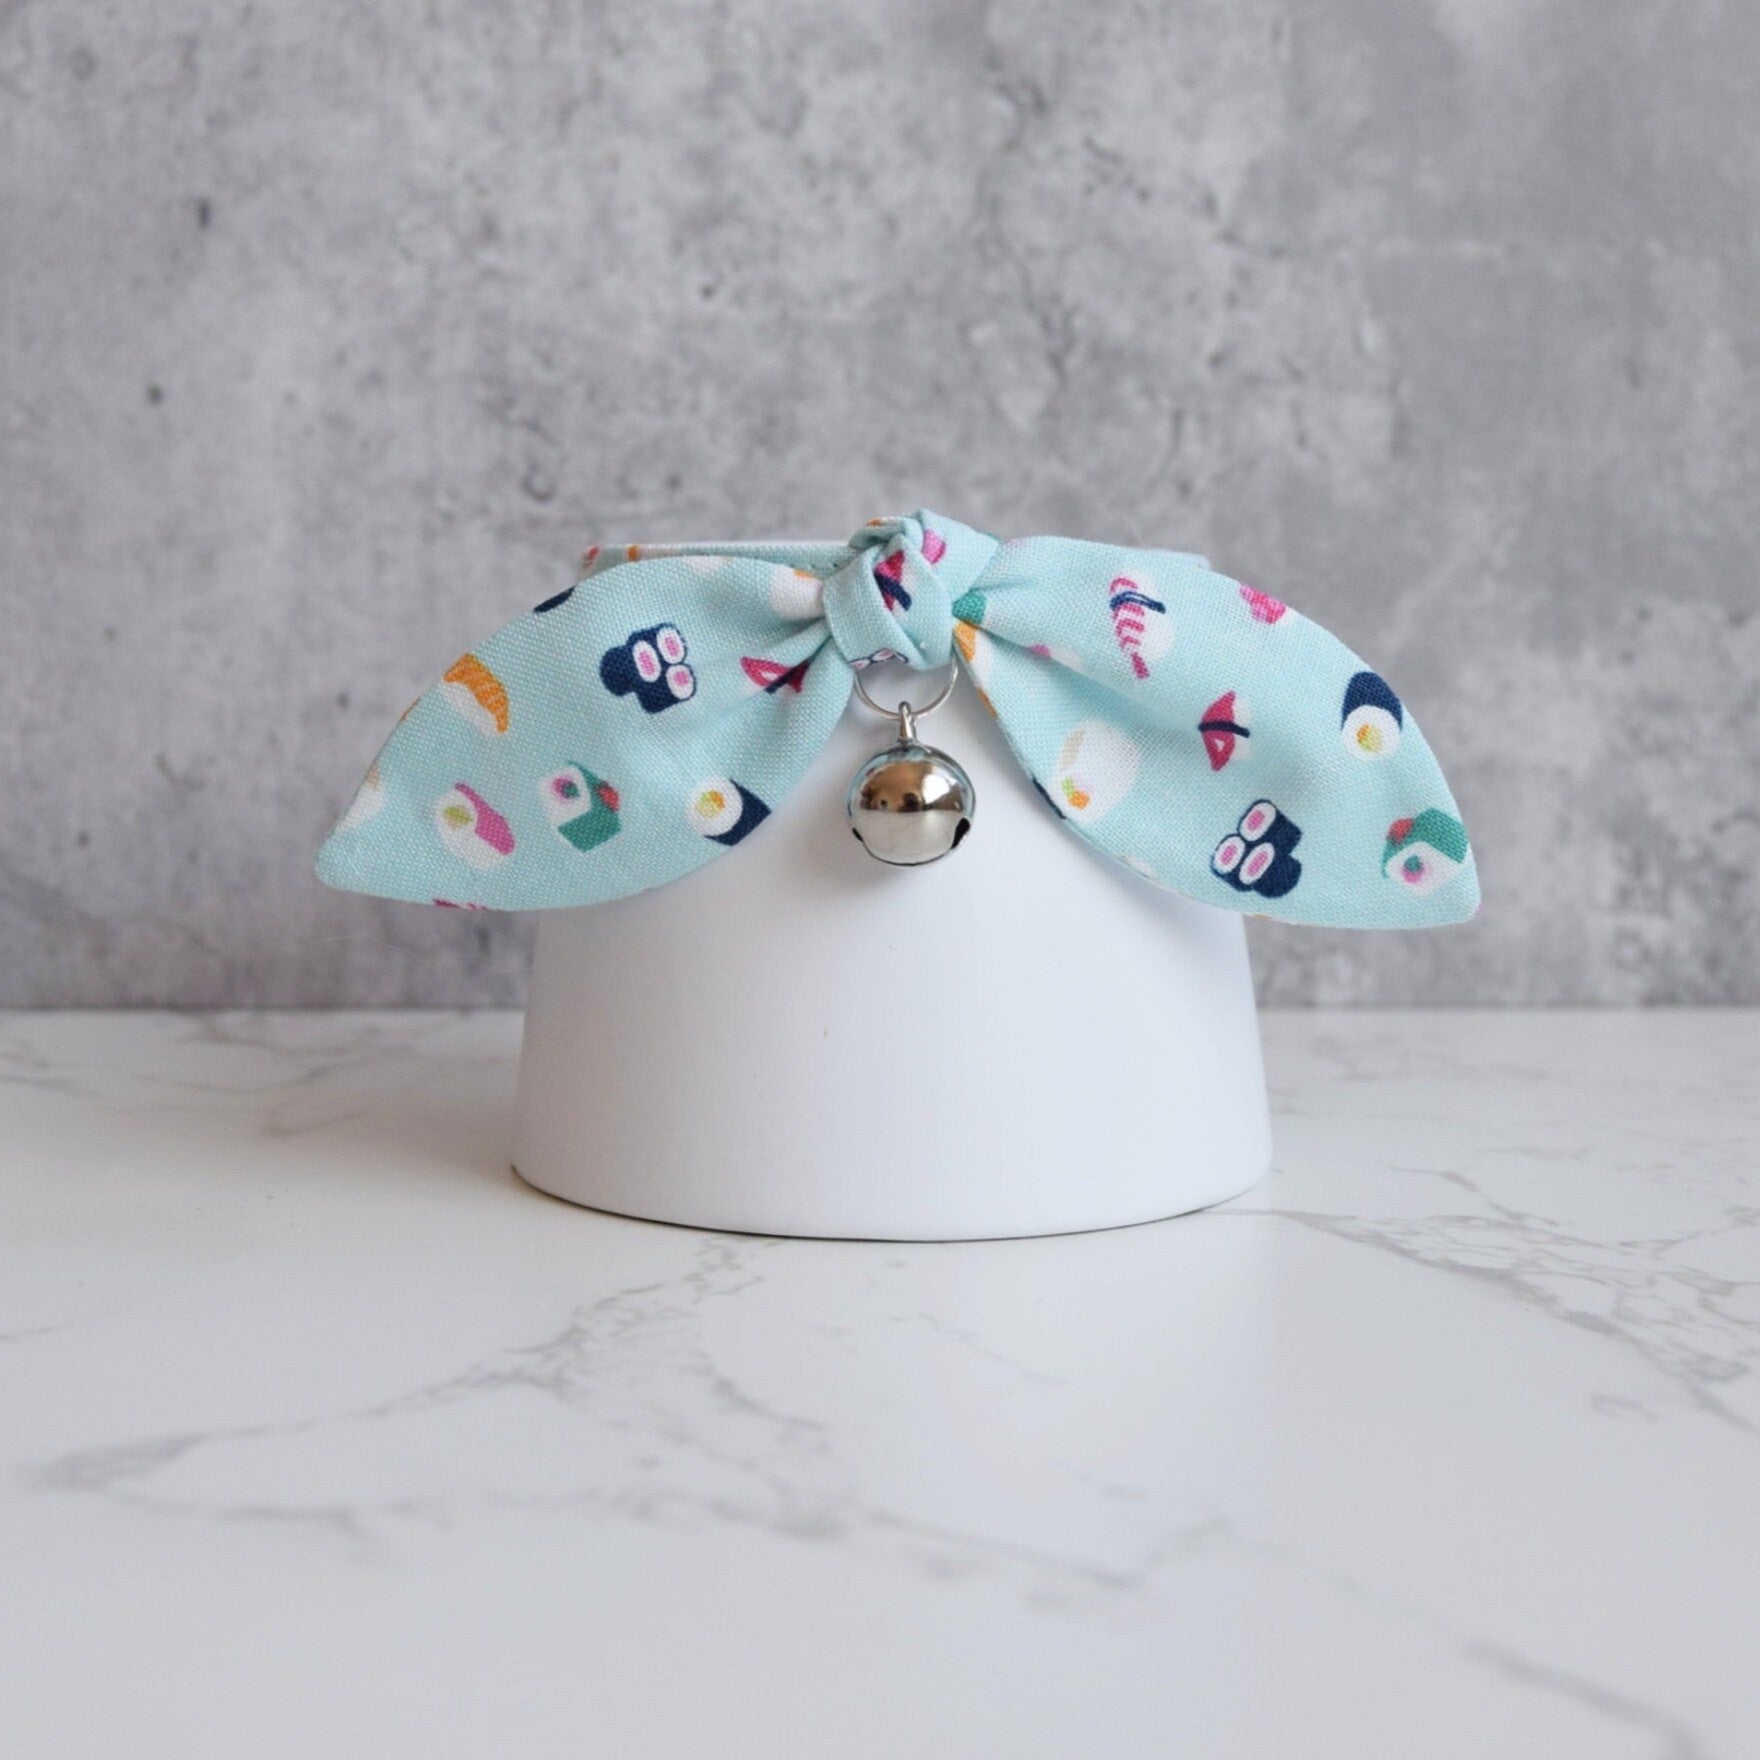 Sushi Cat Collar with Bow - Fun Colorful Breakaway Collar for Cats and Kittens - Soft Cotton Fabric Collar